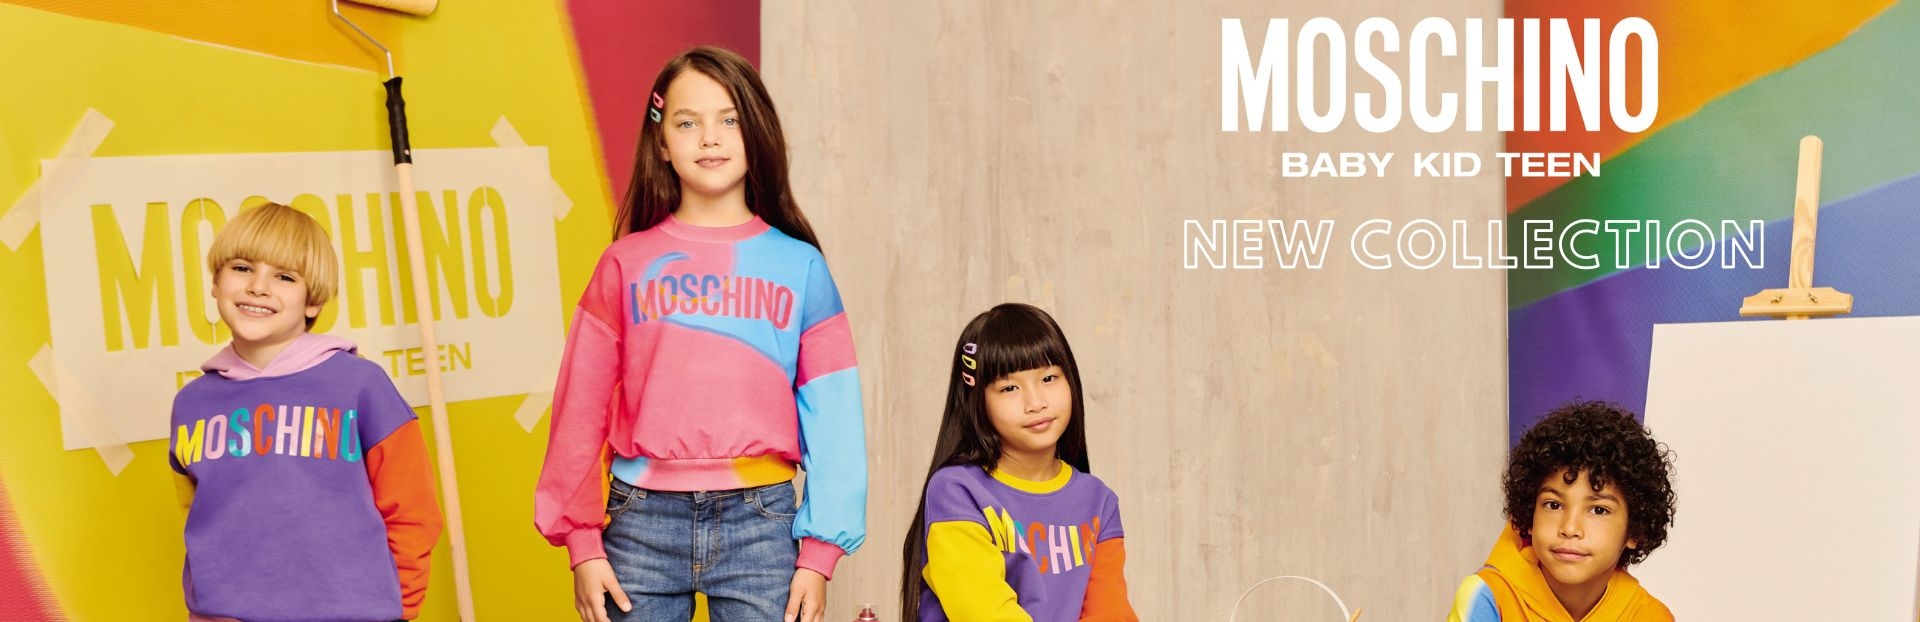 New Collection MOSKINO